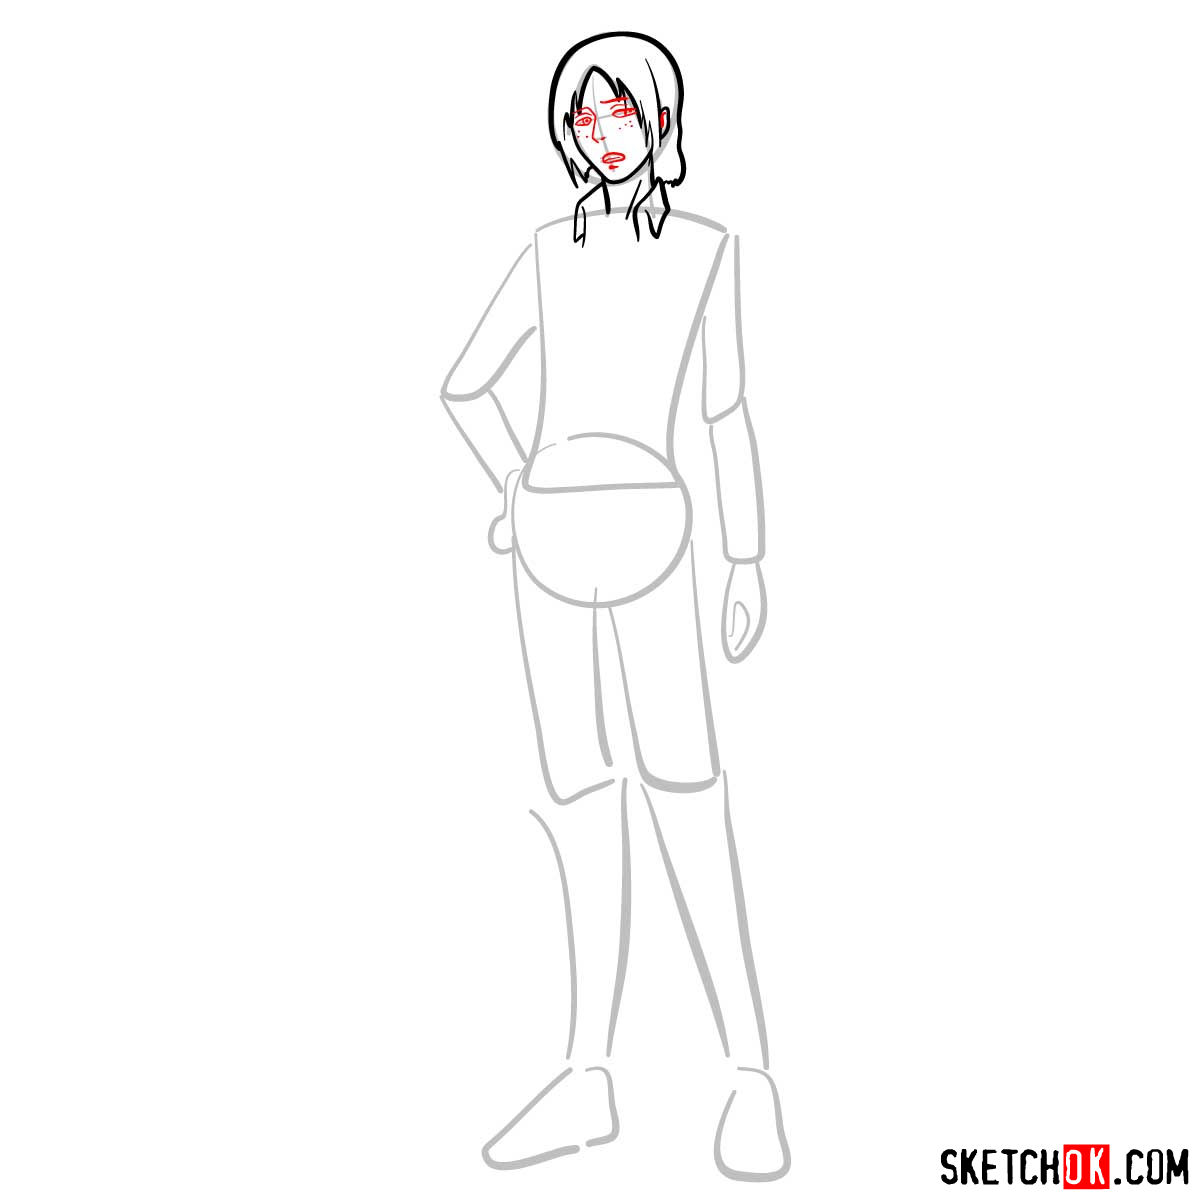 How to draw Ymir from Attack on Titan - step 06